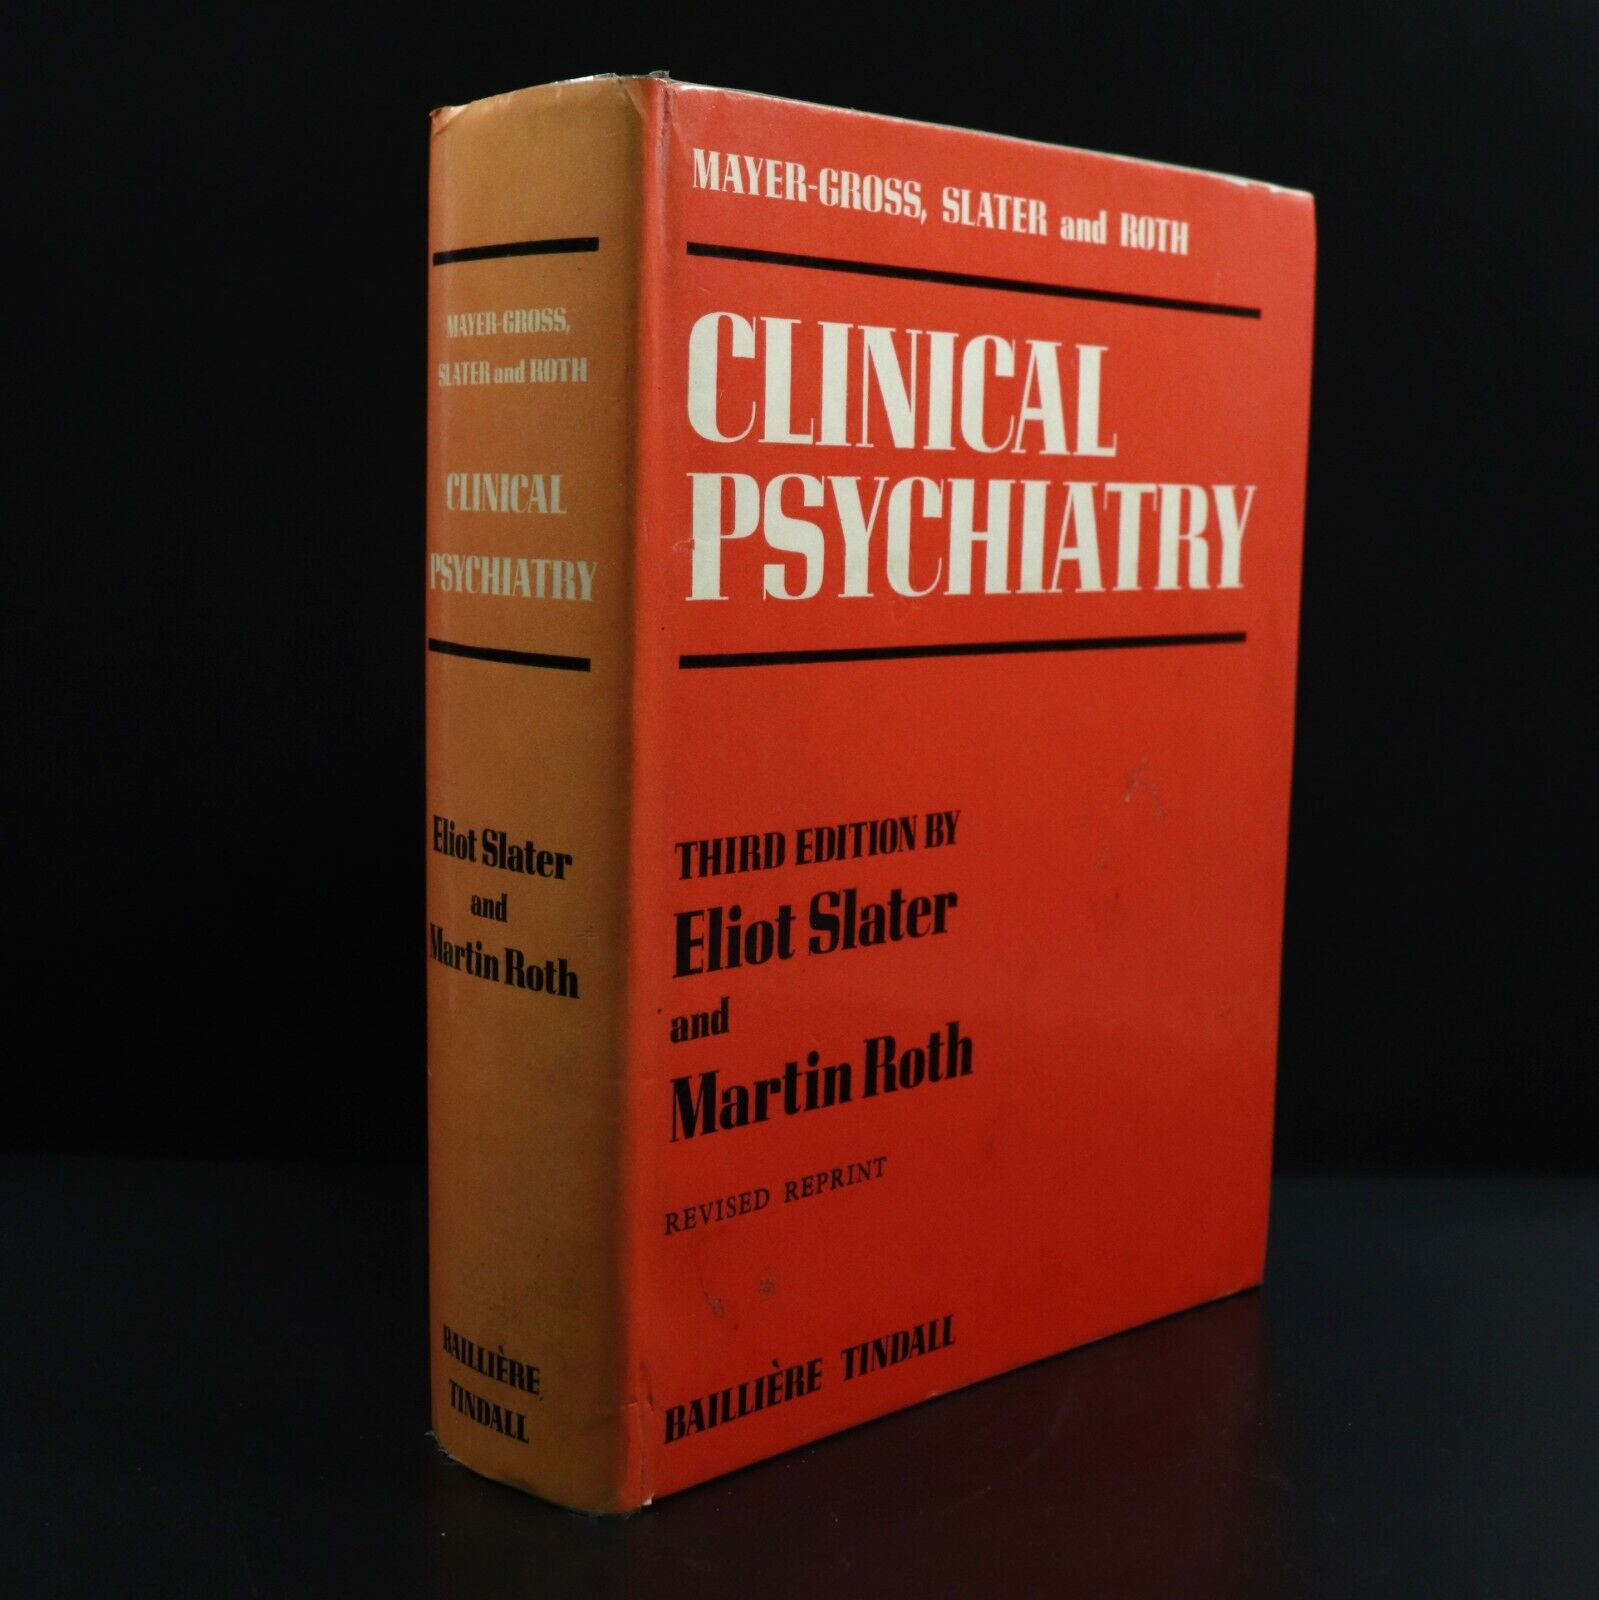 1979 Clinical Psychiatry by Eliot Slater & Martin Roth Medical Reference Book